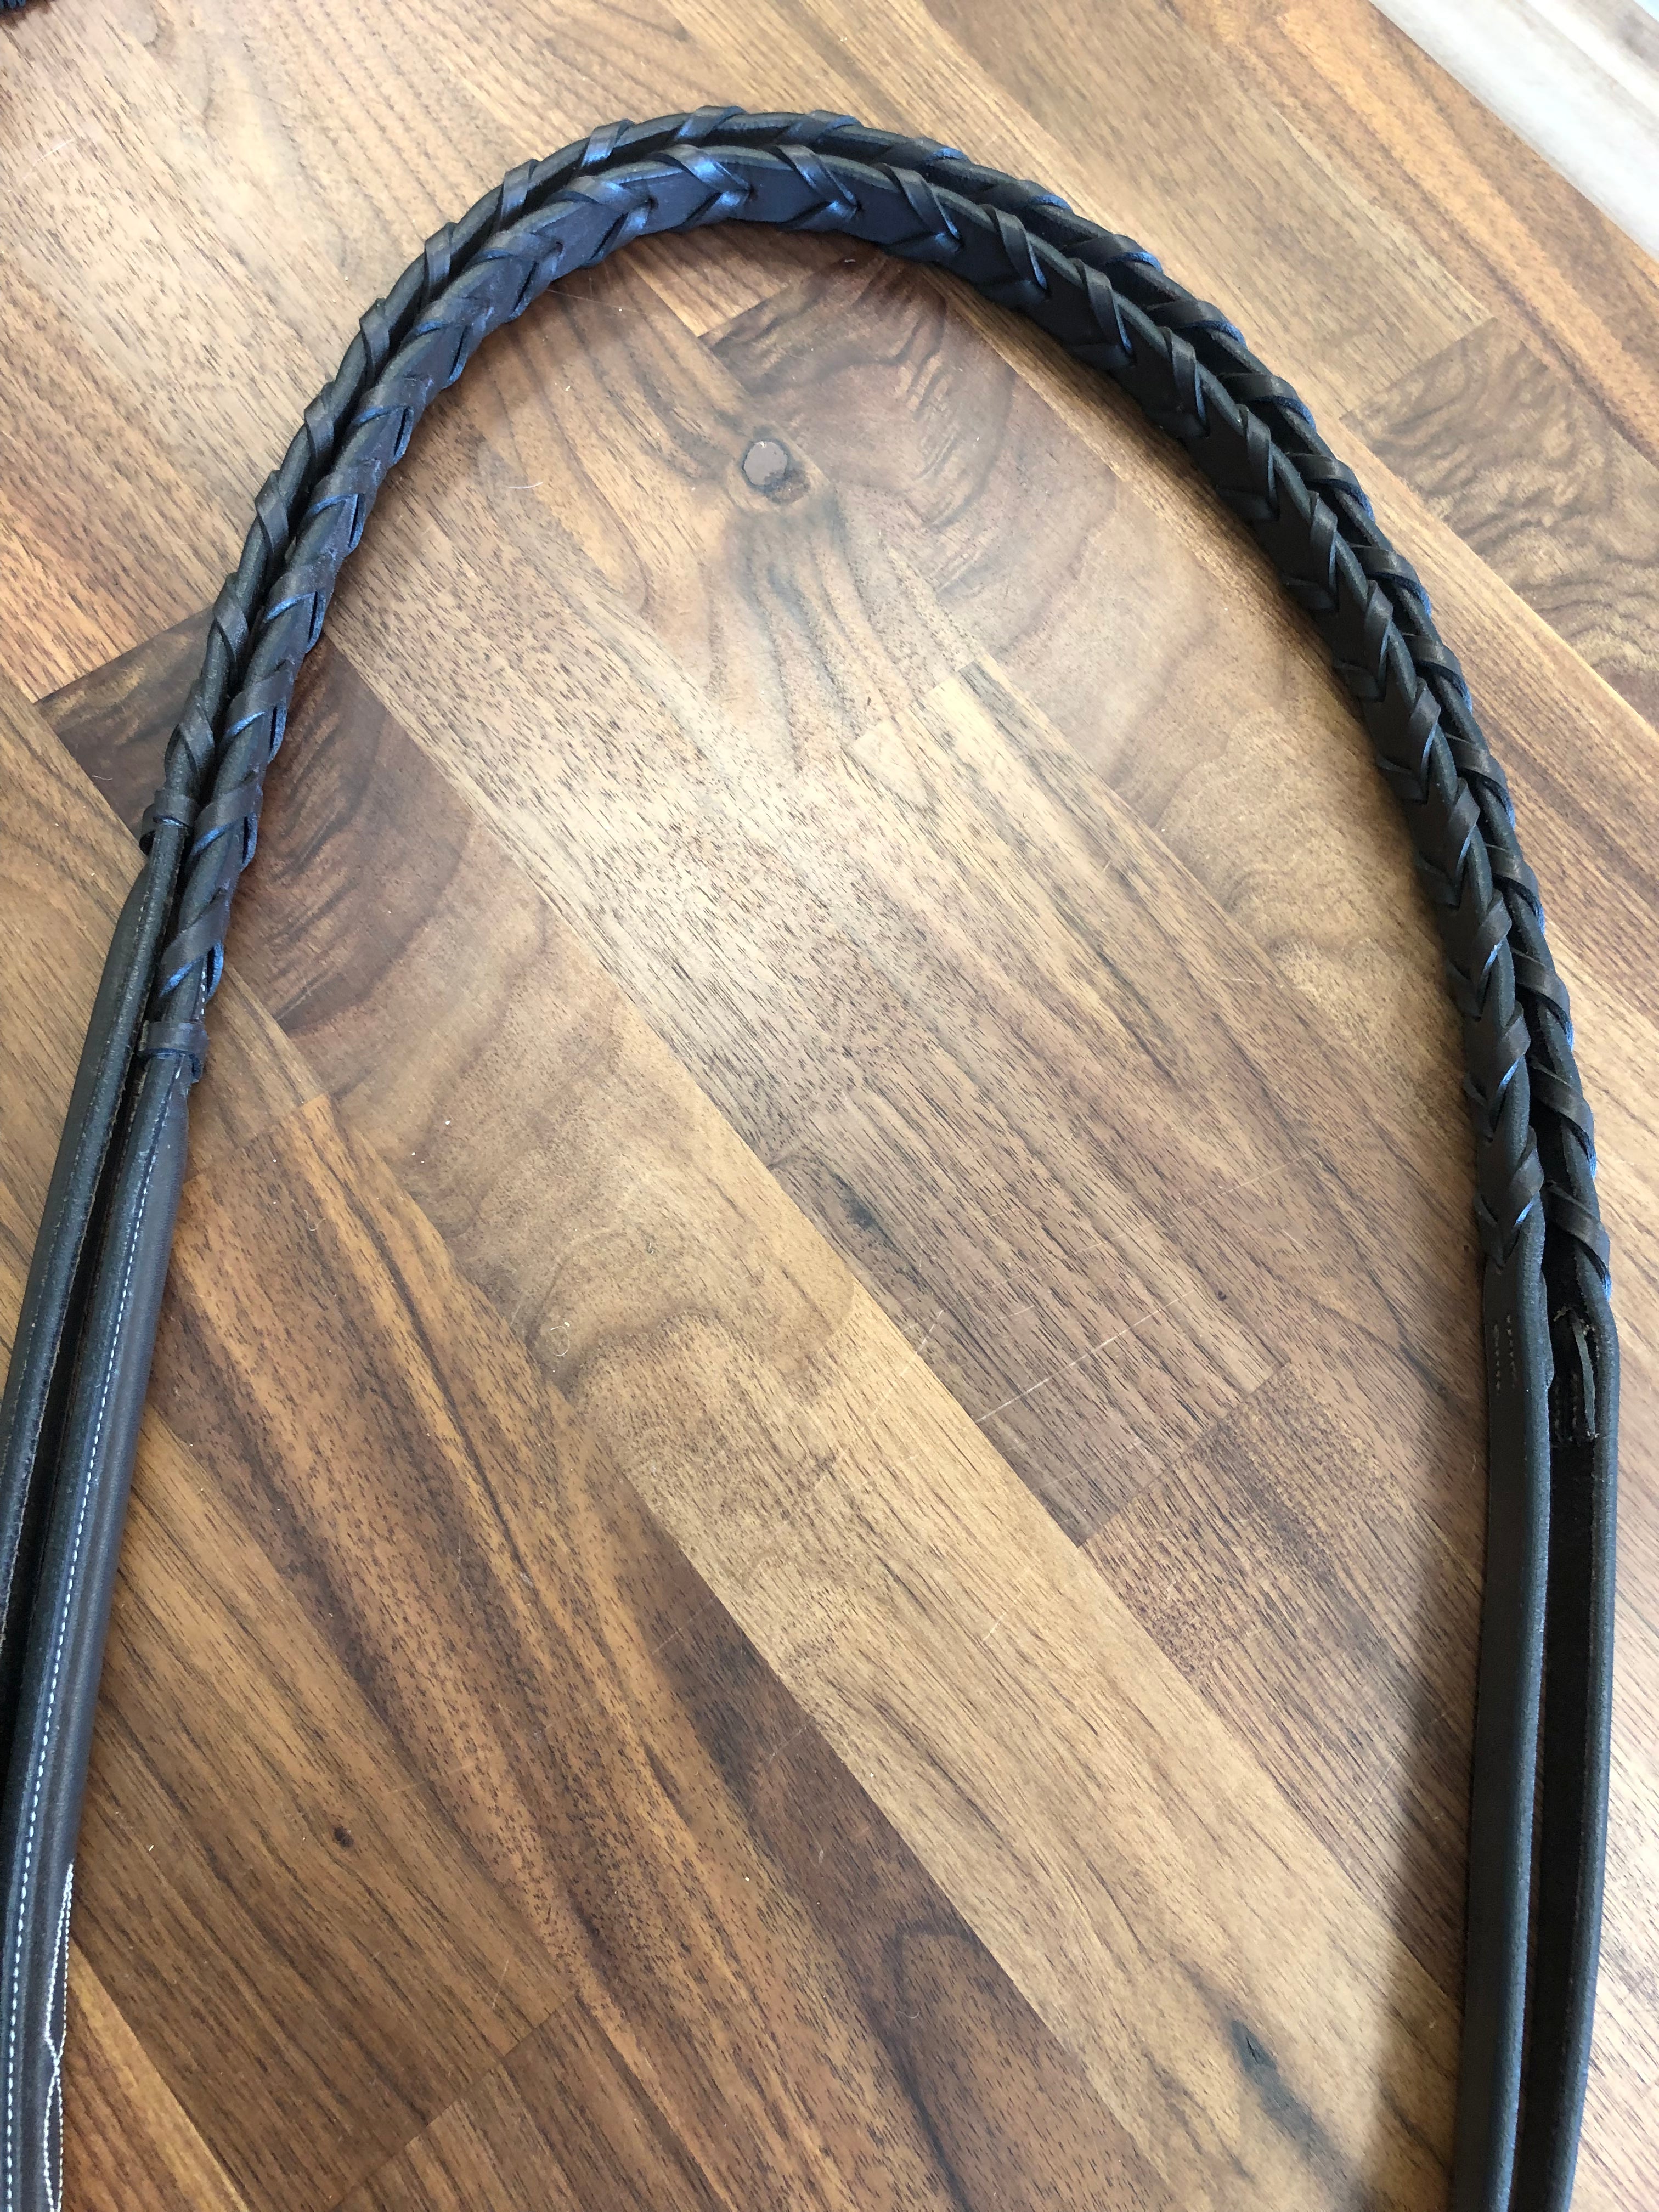 Fine Used KL Select Fancy Stitched Laced Reins - Dark Havana/Full